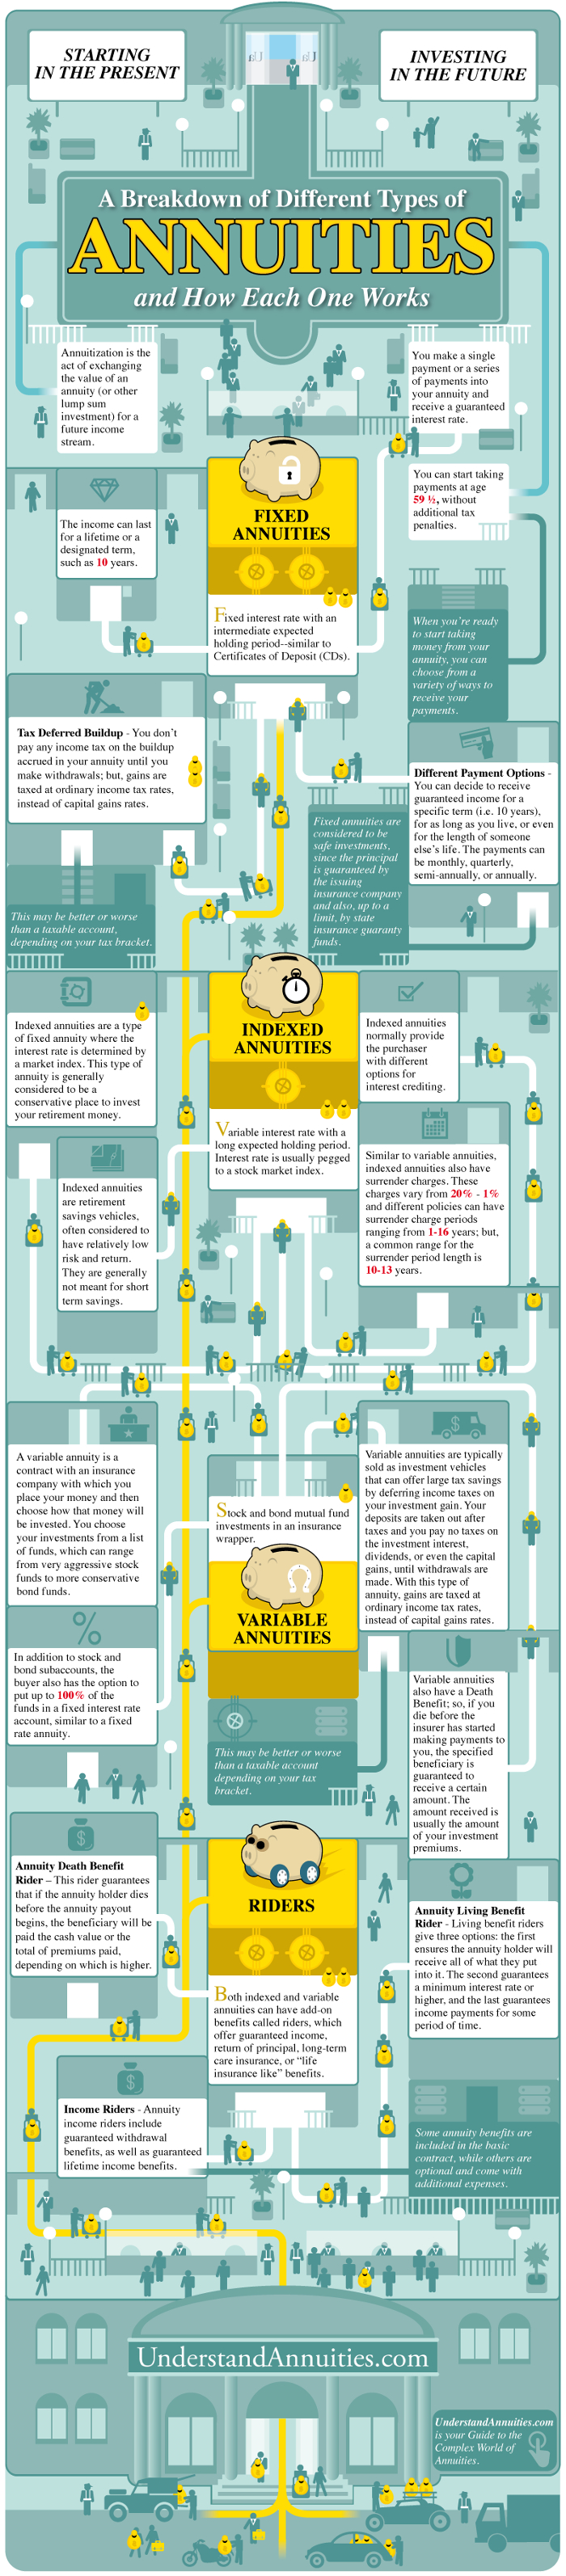 Guide to Annuities